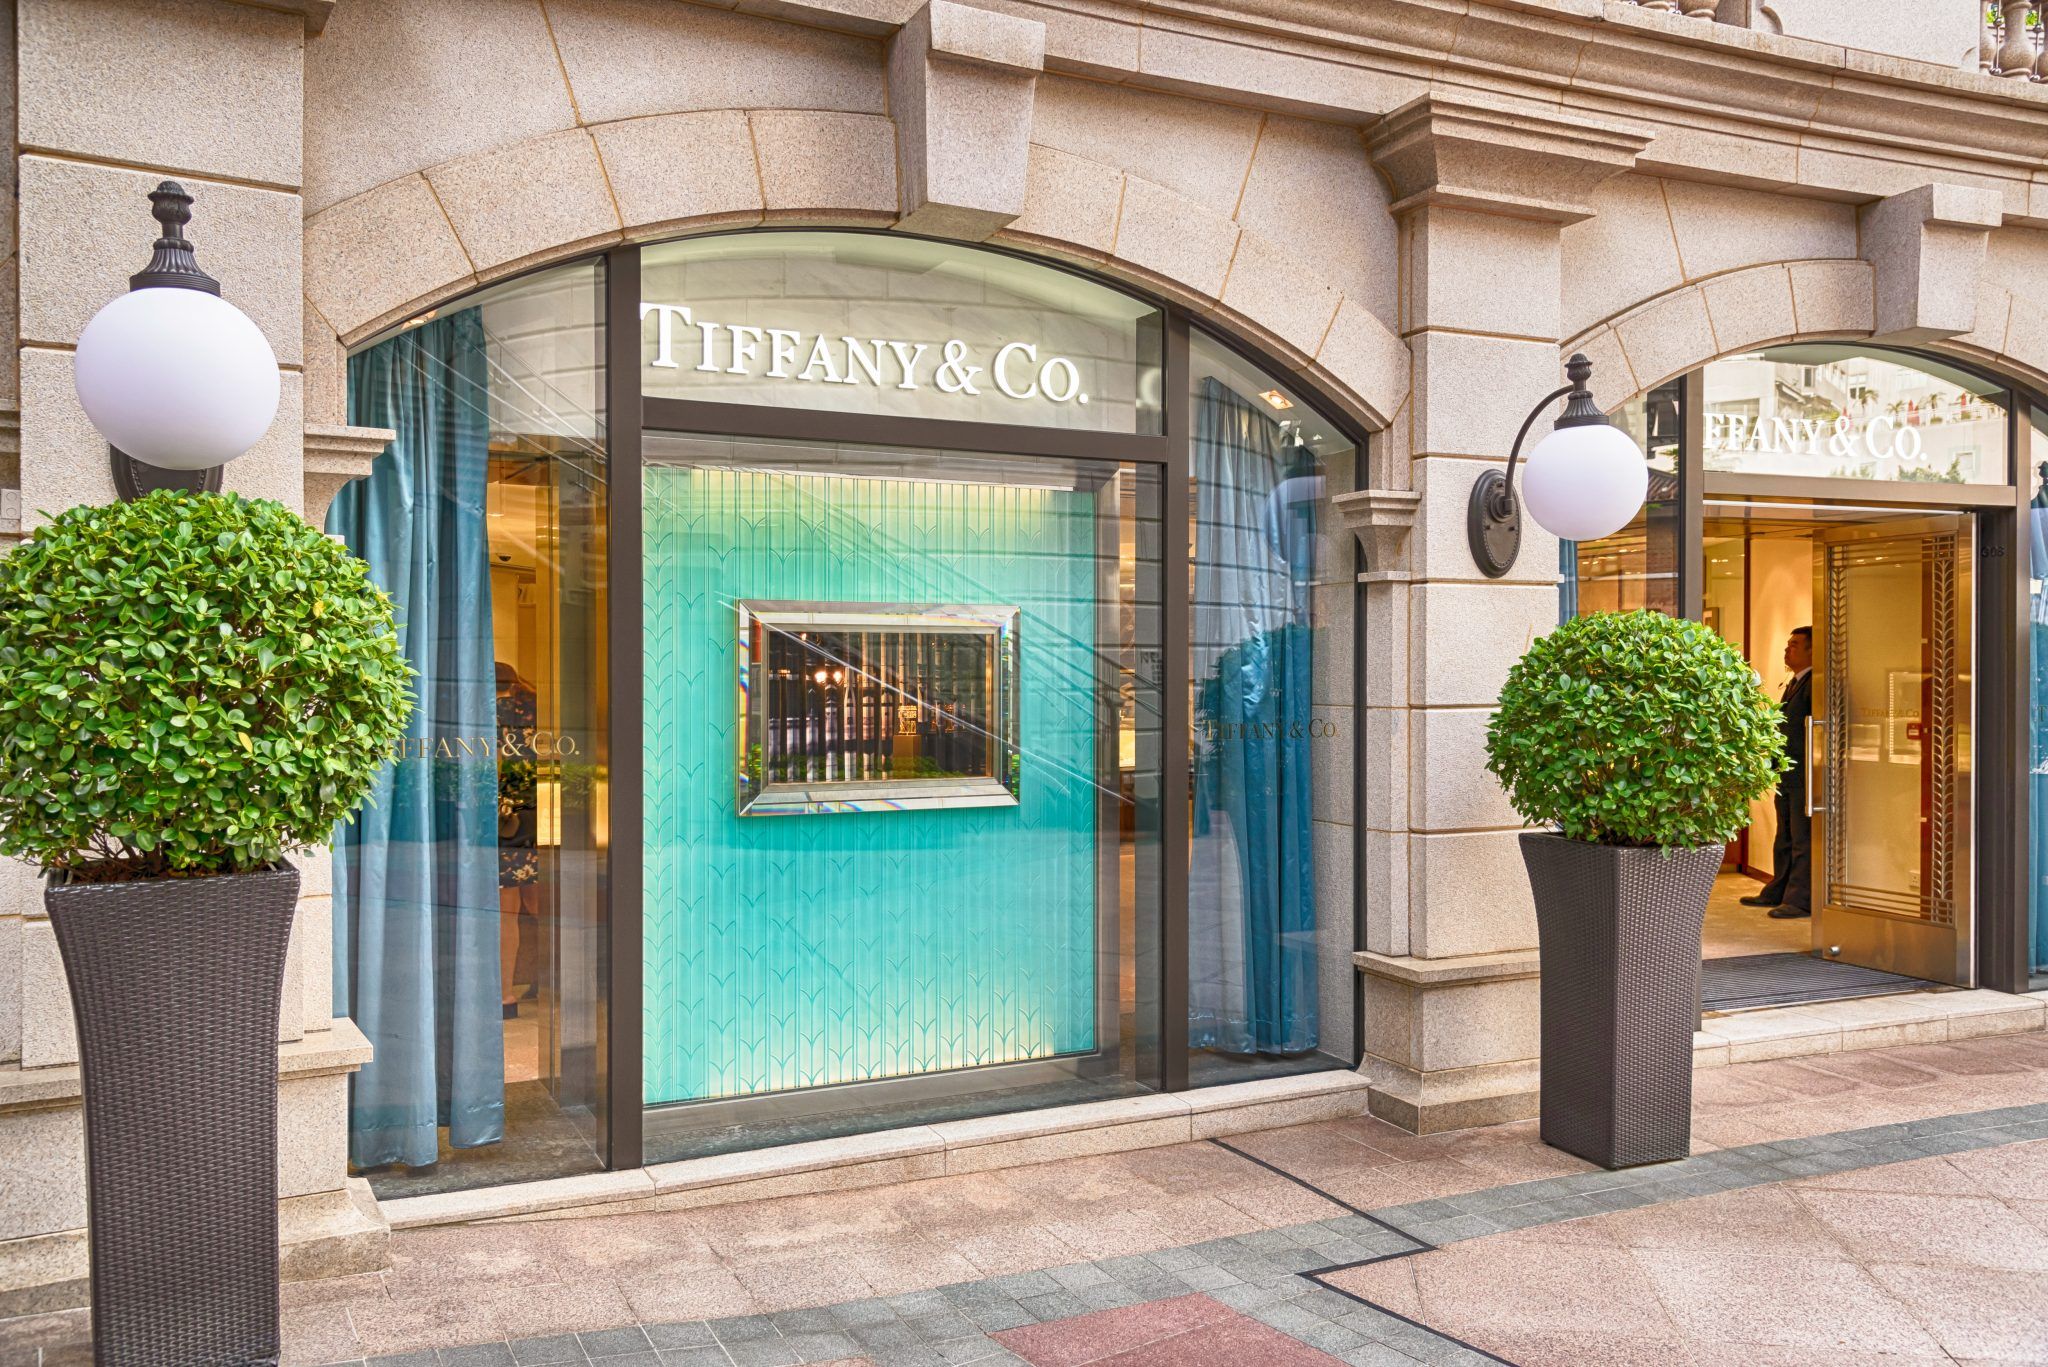 Tiffany Seen Likely to Benefit from U.S. China Trade War